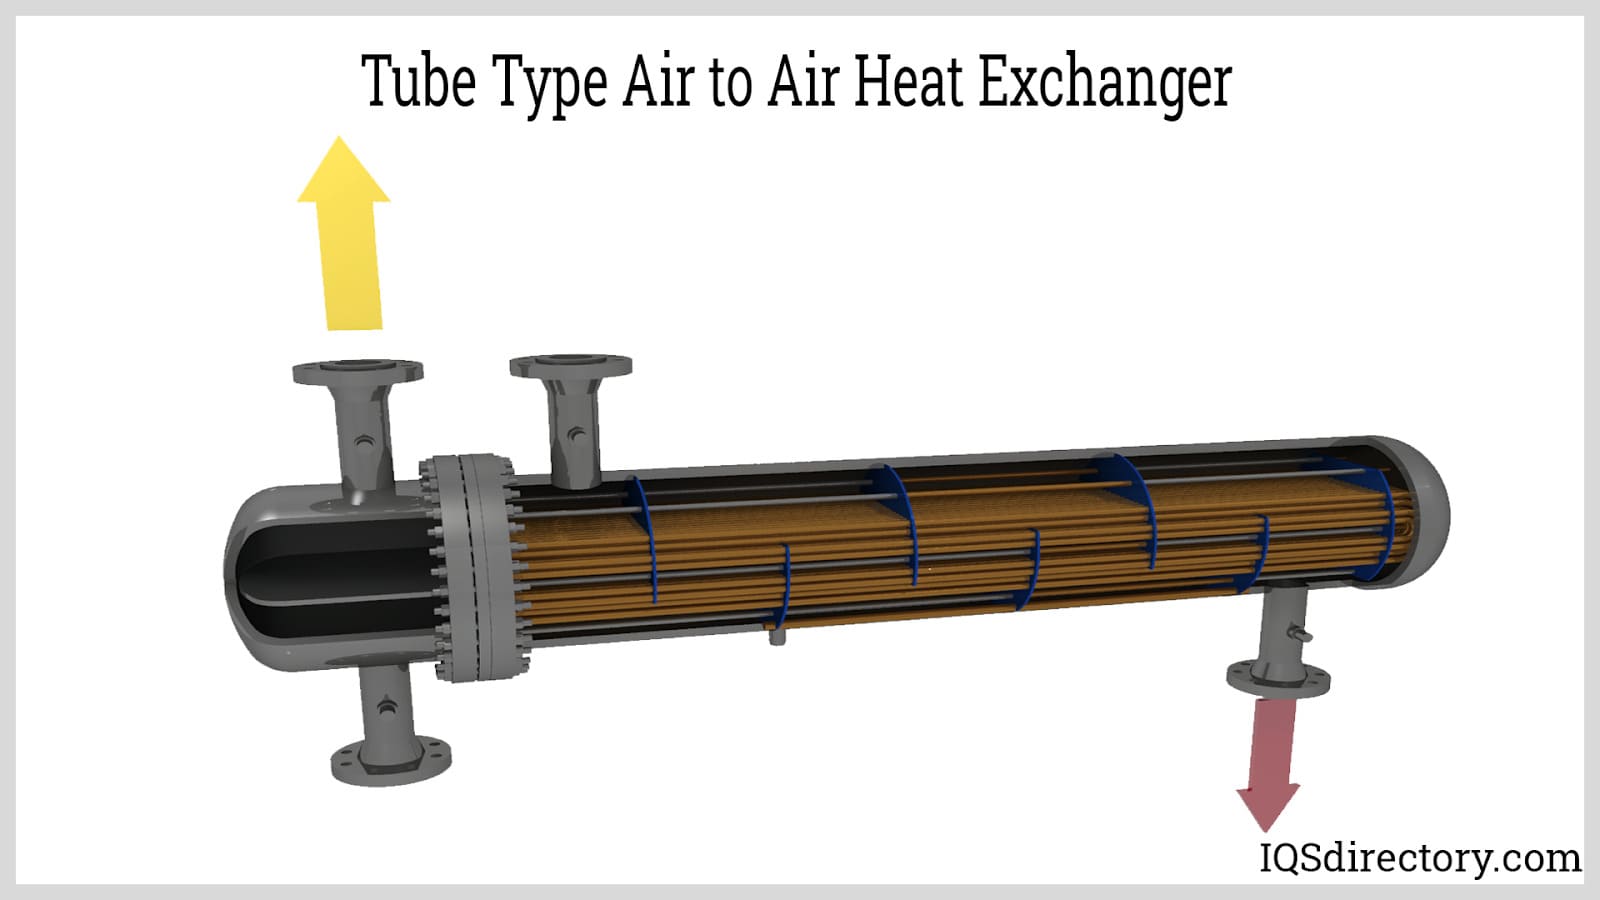 Tube Type Air to Air Heat Exchanger